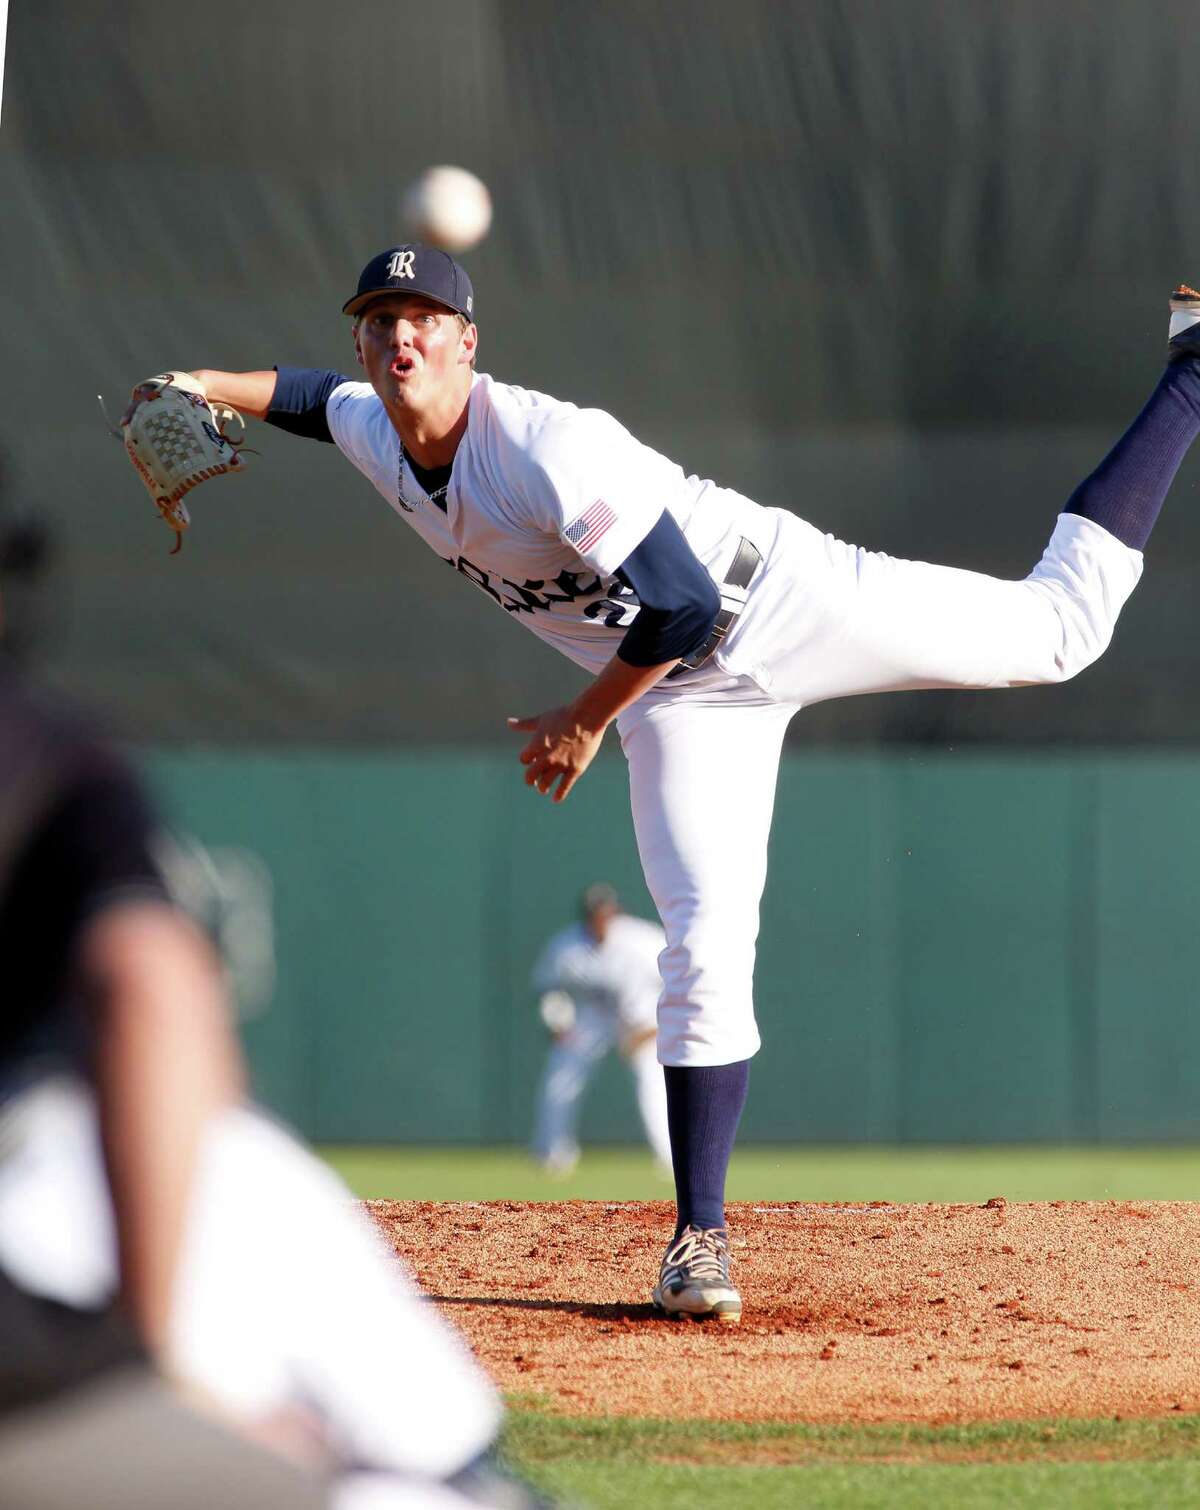 Rice starter Blake Fox combined on a two-hitter in a 3-0 victory over Louisiana Tech on Friday to run his record to 11-0 this season and 17-0 over two seasons.